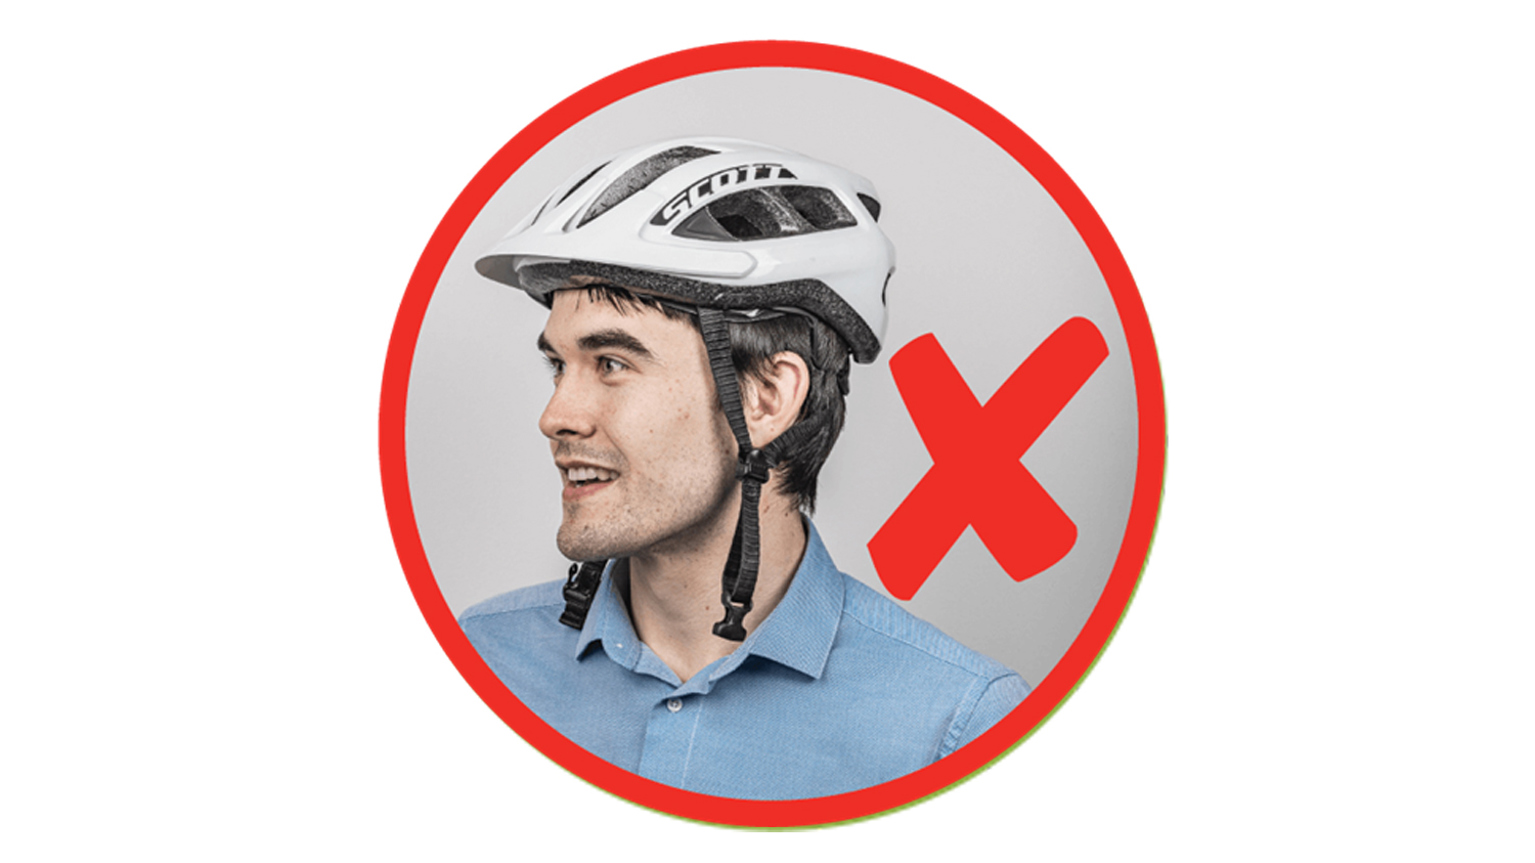 A man wears a helmet without the buckle being secure.